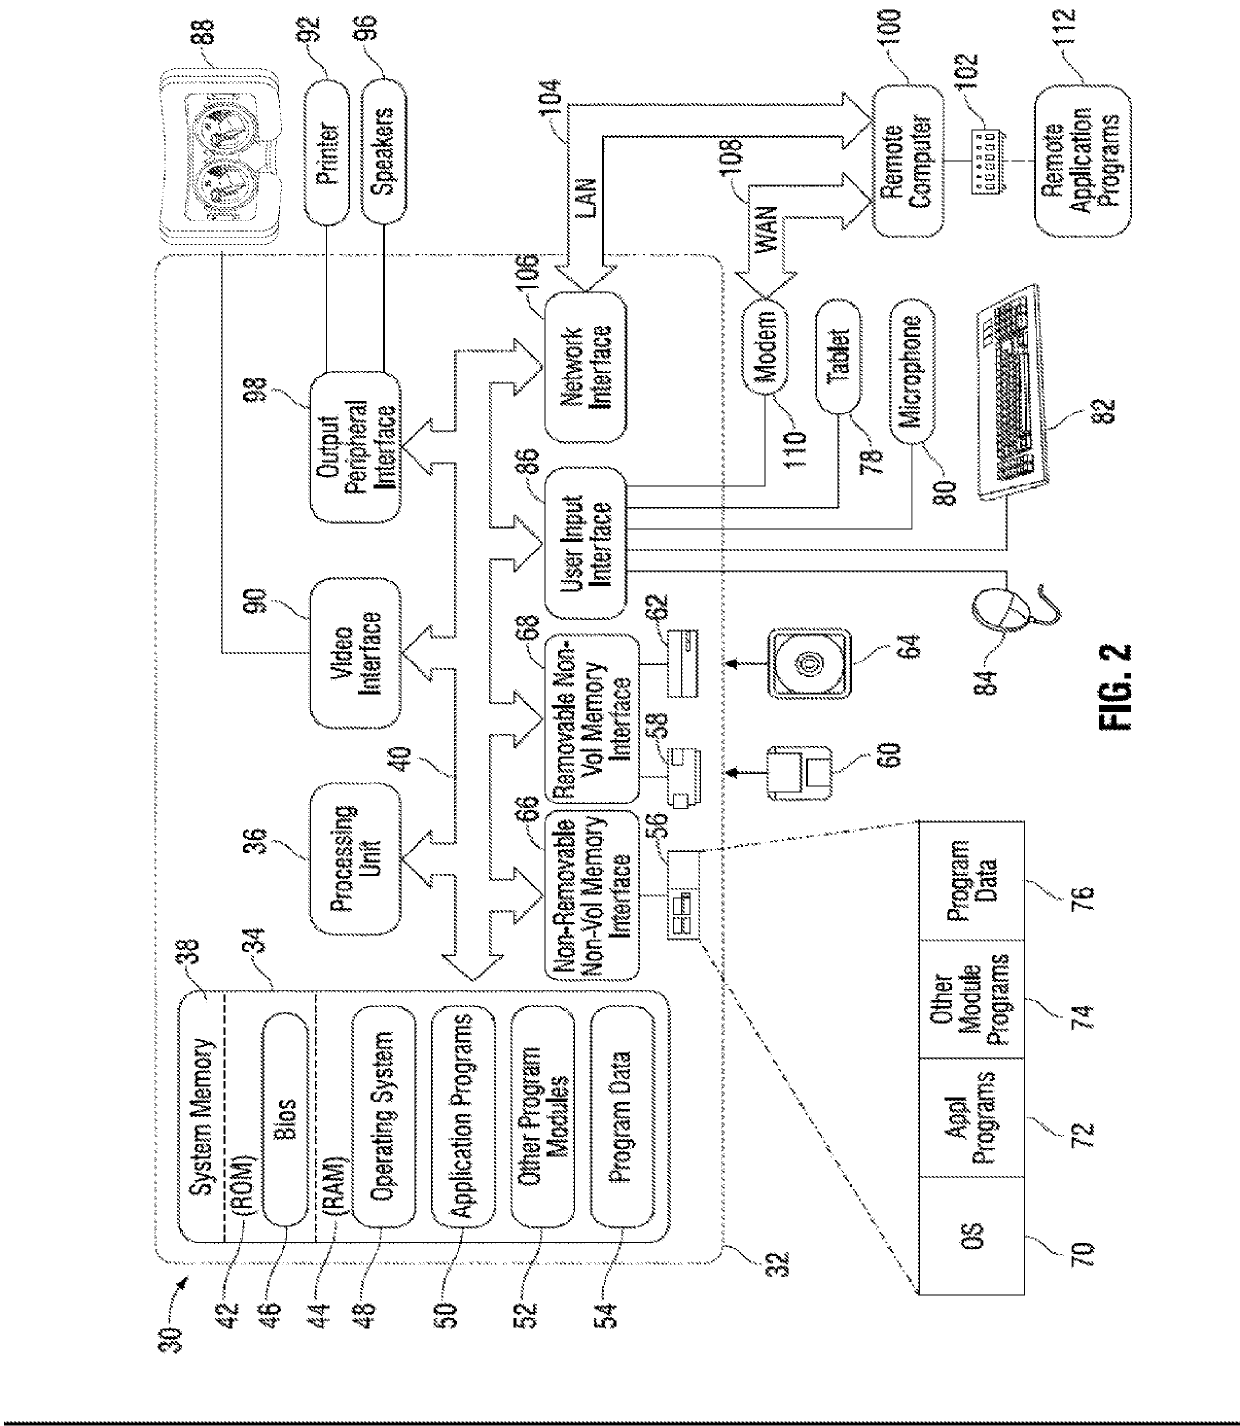 Method and system for providing advertising in immersive digital environments